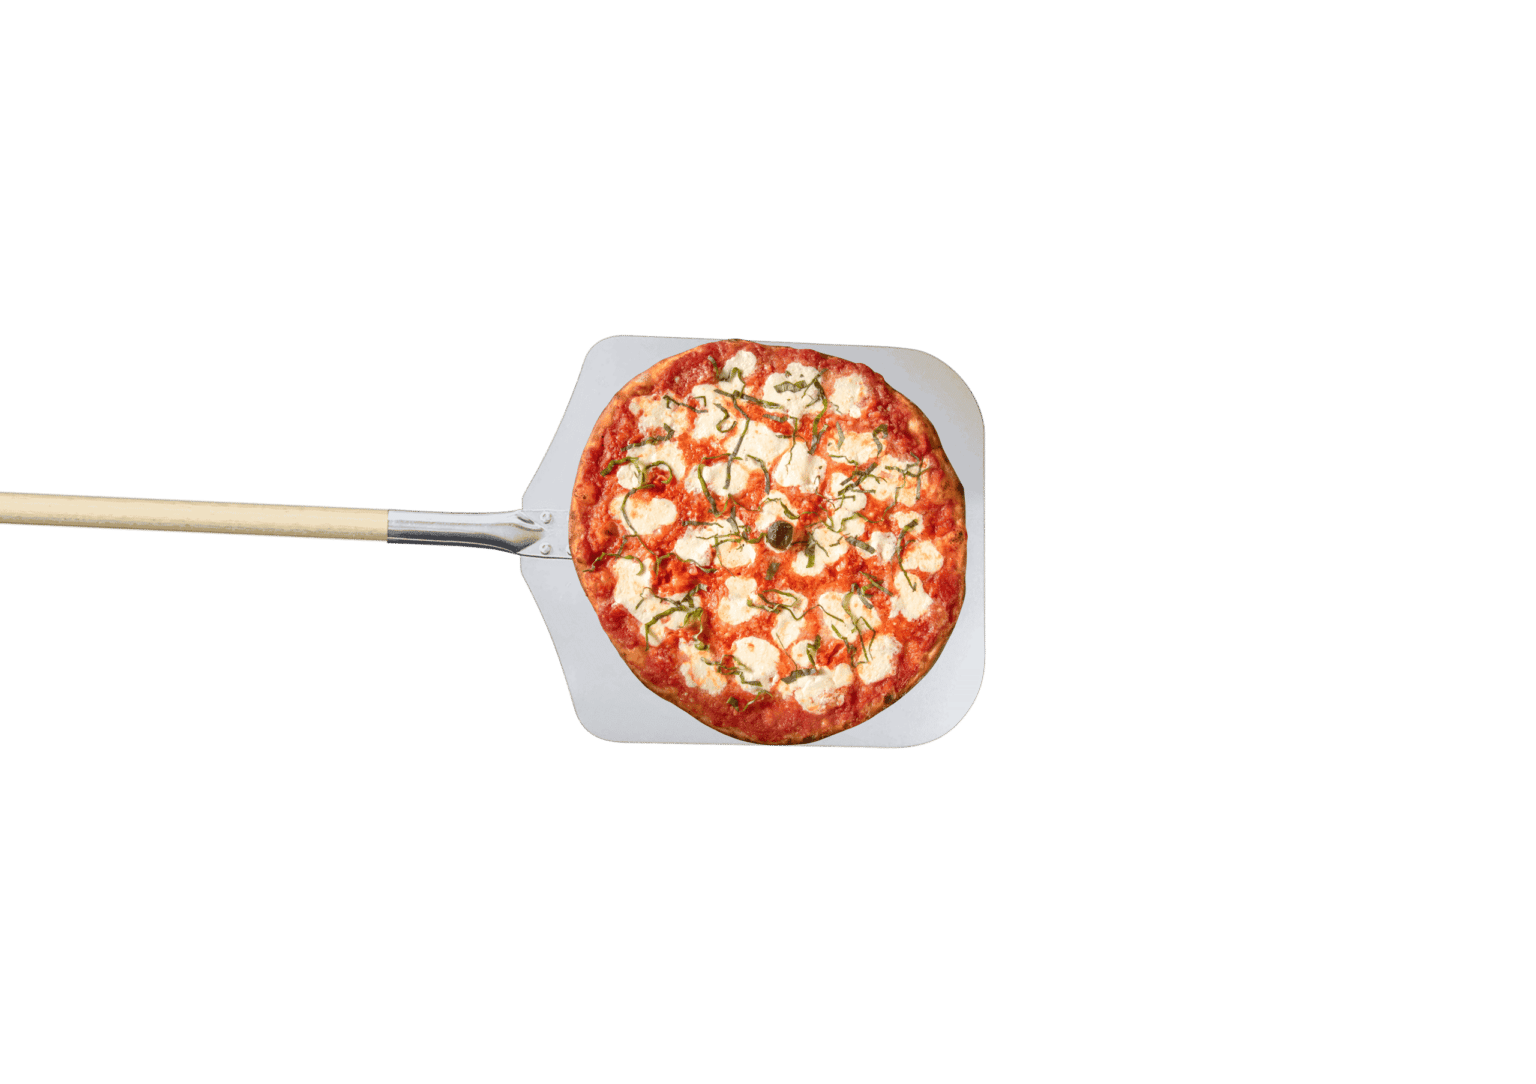 Bertucci's Margherita Pizza on a paddle